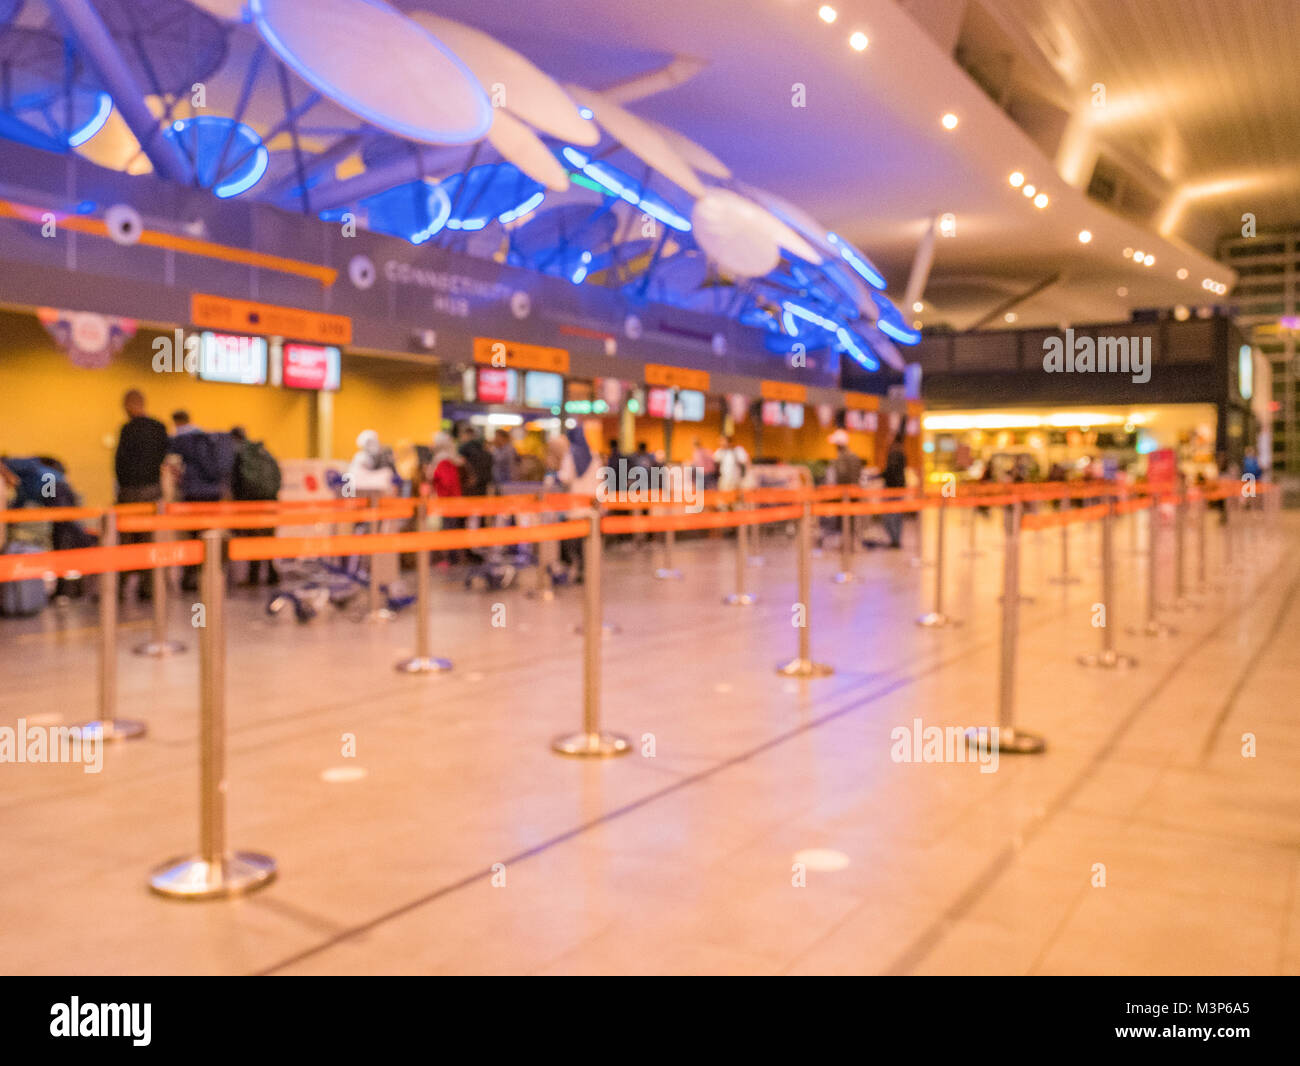 Queue Line in Airport with Blur Background, Crowd Control Retractable Belt Stock Photo